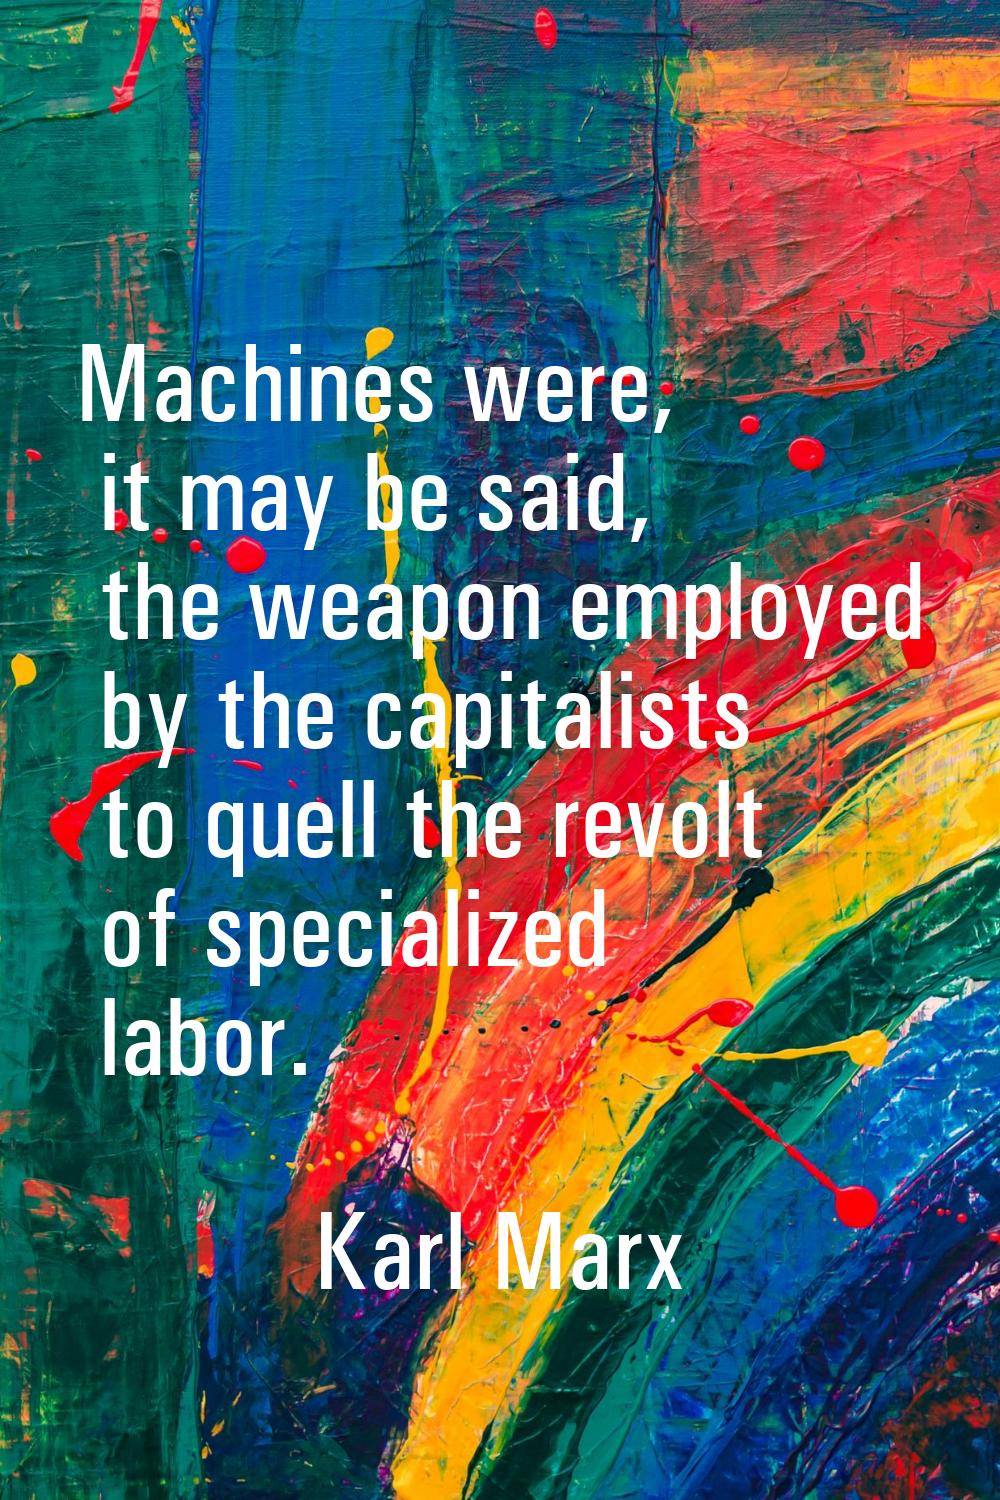 Machines were, it may be said, the weapon employed by the capitalists to quell the revolt of specia